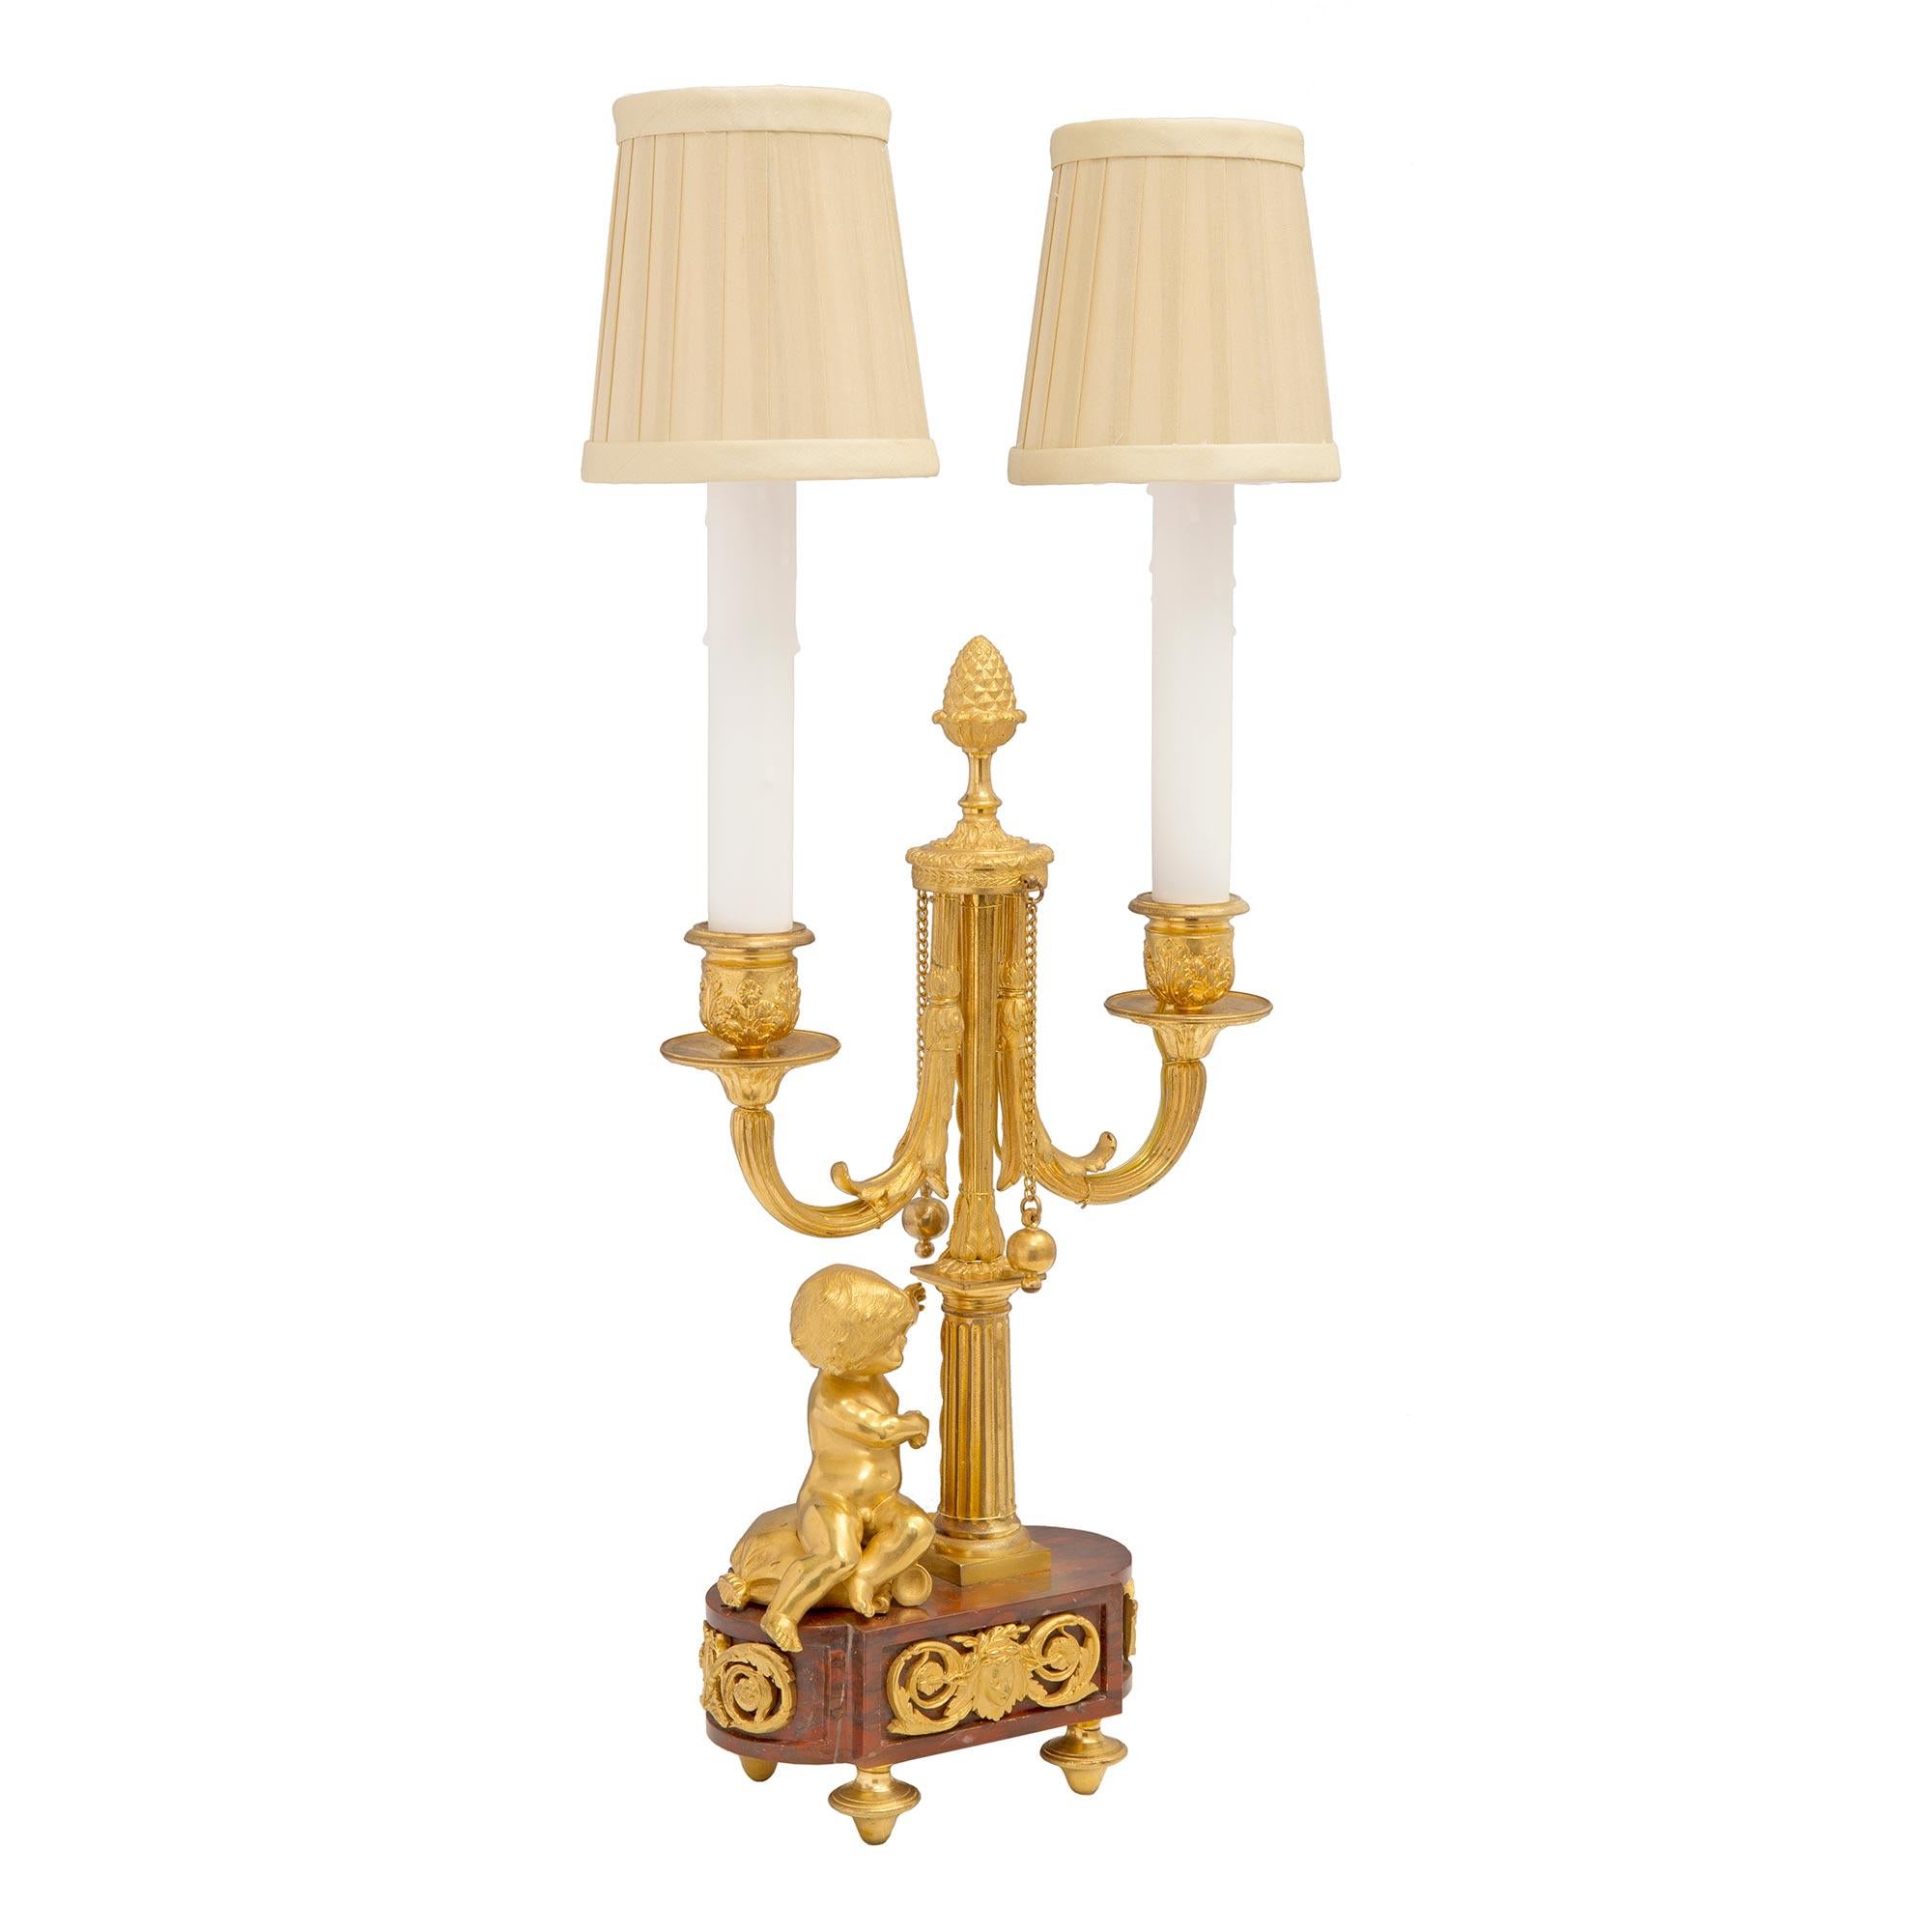 A high quality and most charming true pair of French 19th century Louis XVI st. Rouge Griotte marble and ormolu two arm candelabra lamps. Each lamp is raised by elegant ormolu topie shaped feet below the oval shaped Rouge Griotte marble base, with